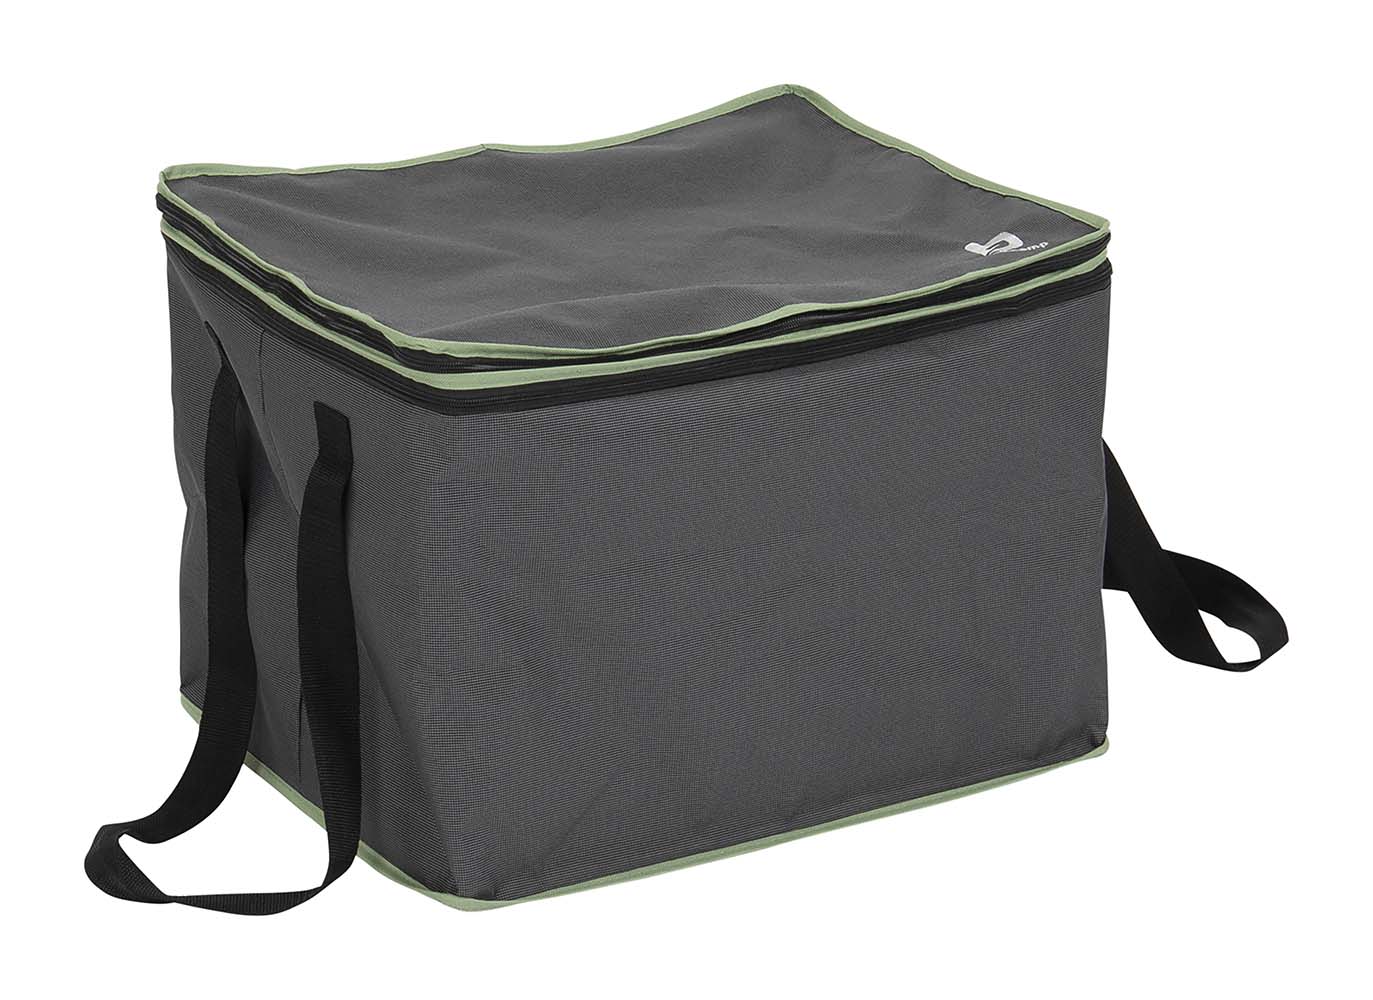 4117381 This toilet storage bag allows you to easily and safely transport your toilet. The bag has a zipper that allows the bag to be made larger and smaller. This allows almost any toilet to be carried in this bag. The bag is made of Two-Tone 600D Oxford Polyester.